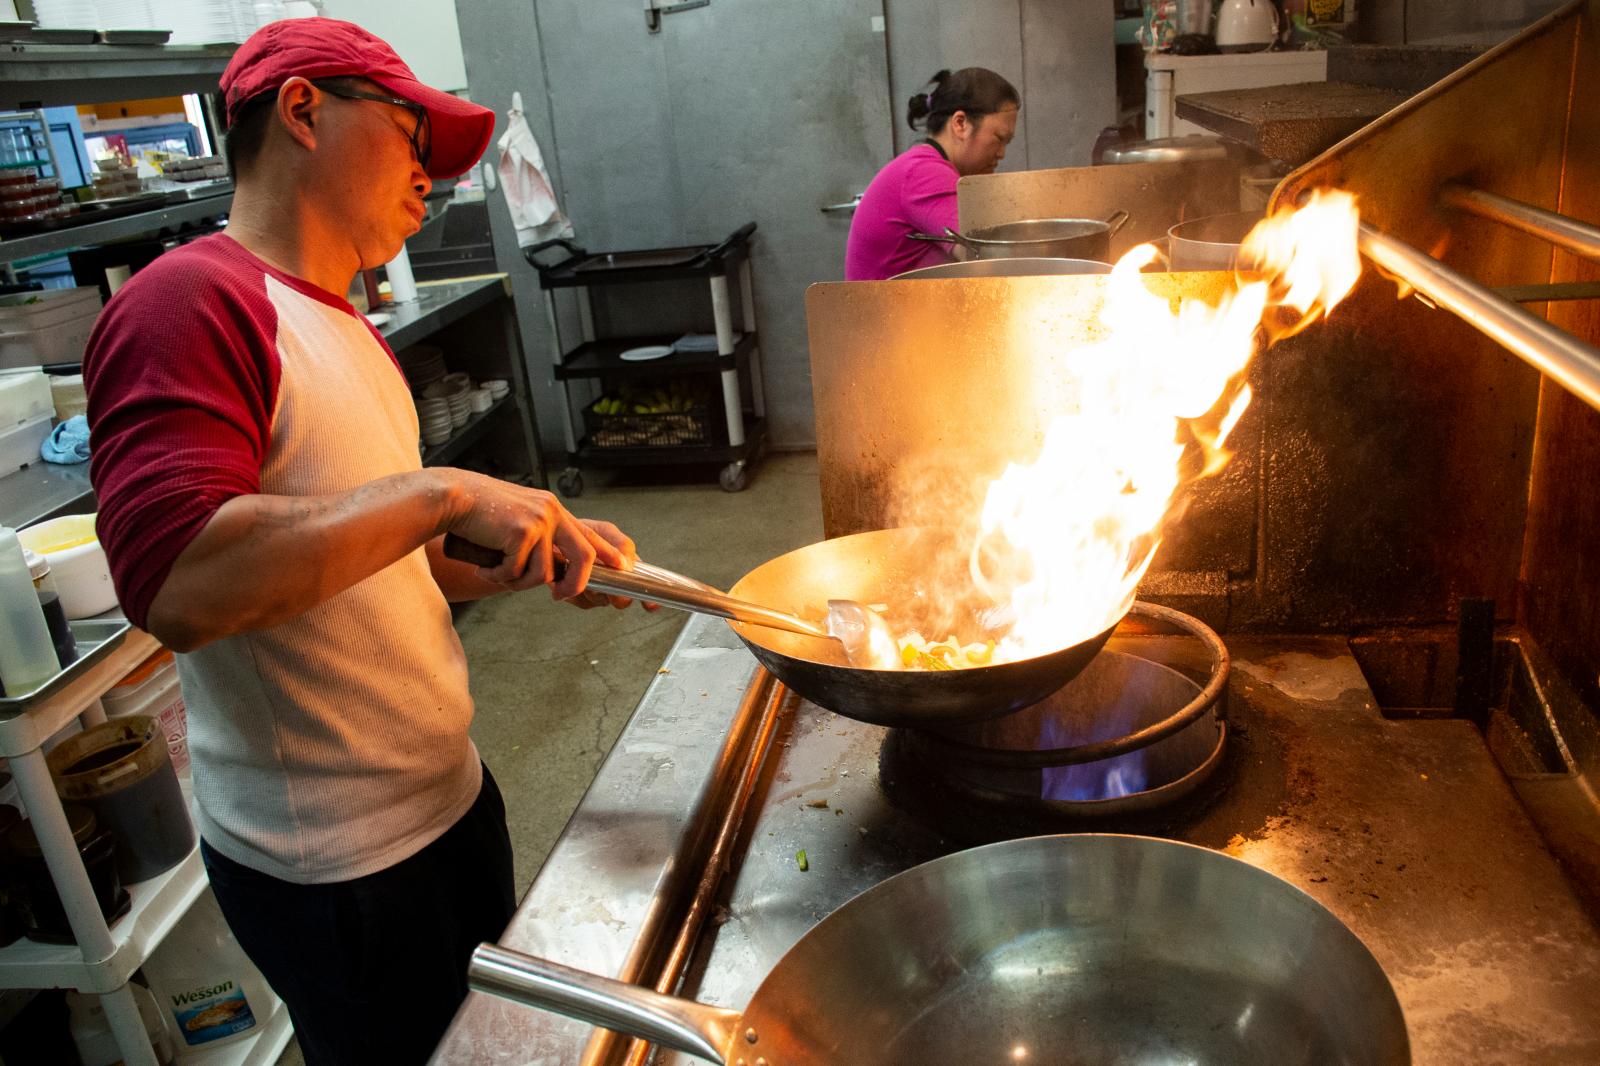 Tiger Chef owner Sai Tai cooks ...lizes in Thai and Burmese food.